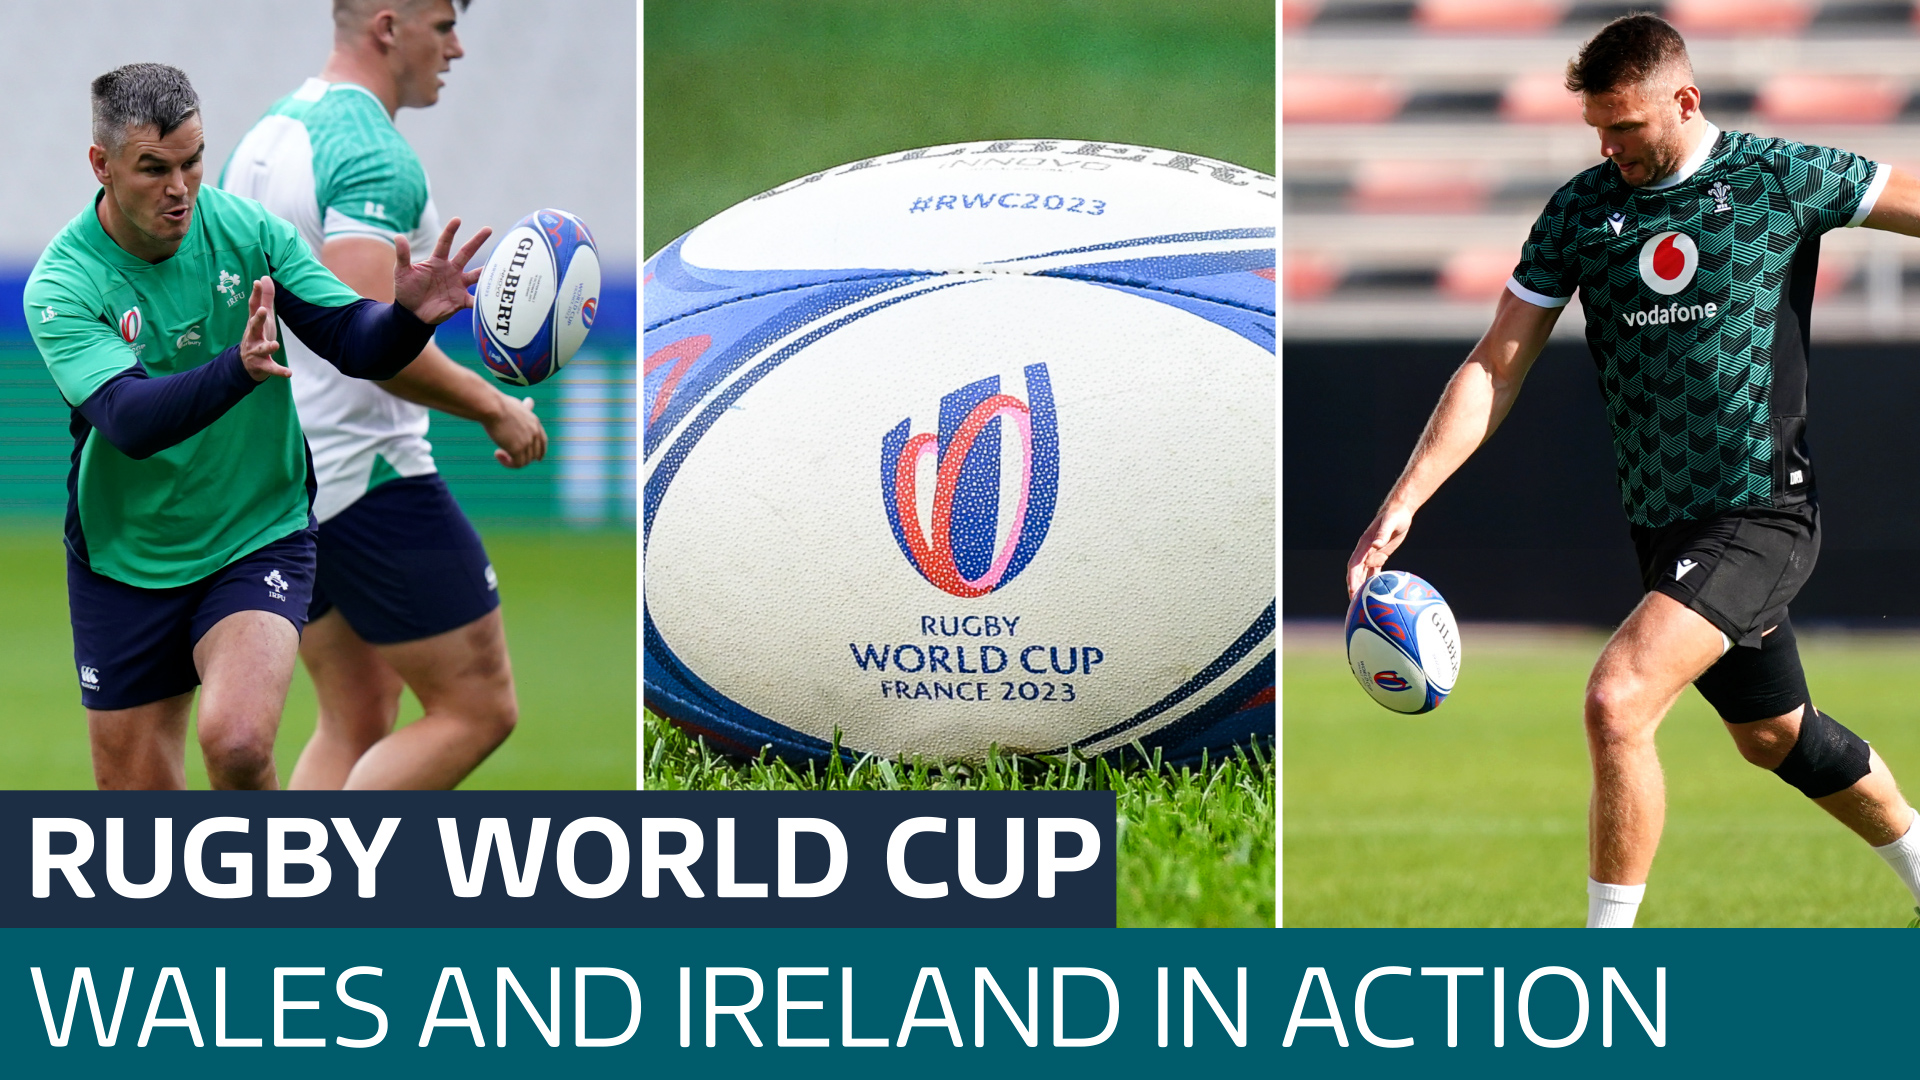 Rugby World Cup quarter-finals get underway, with Wales and Ireland in action today